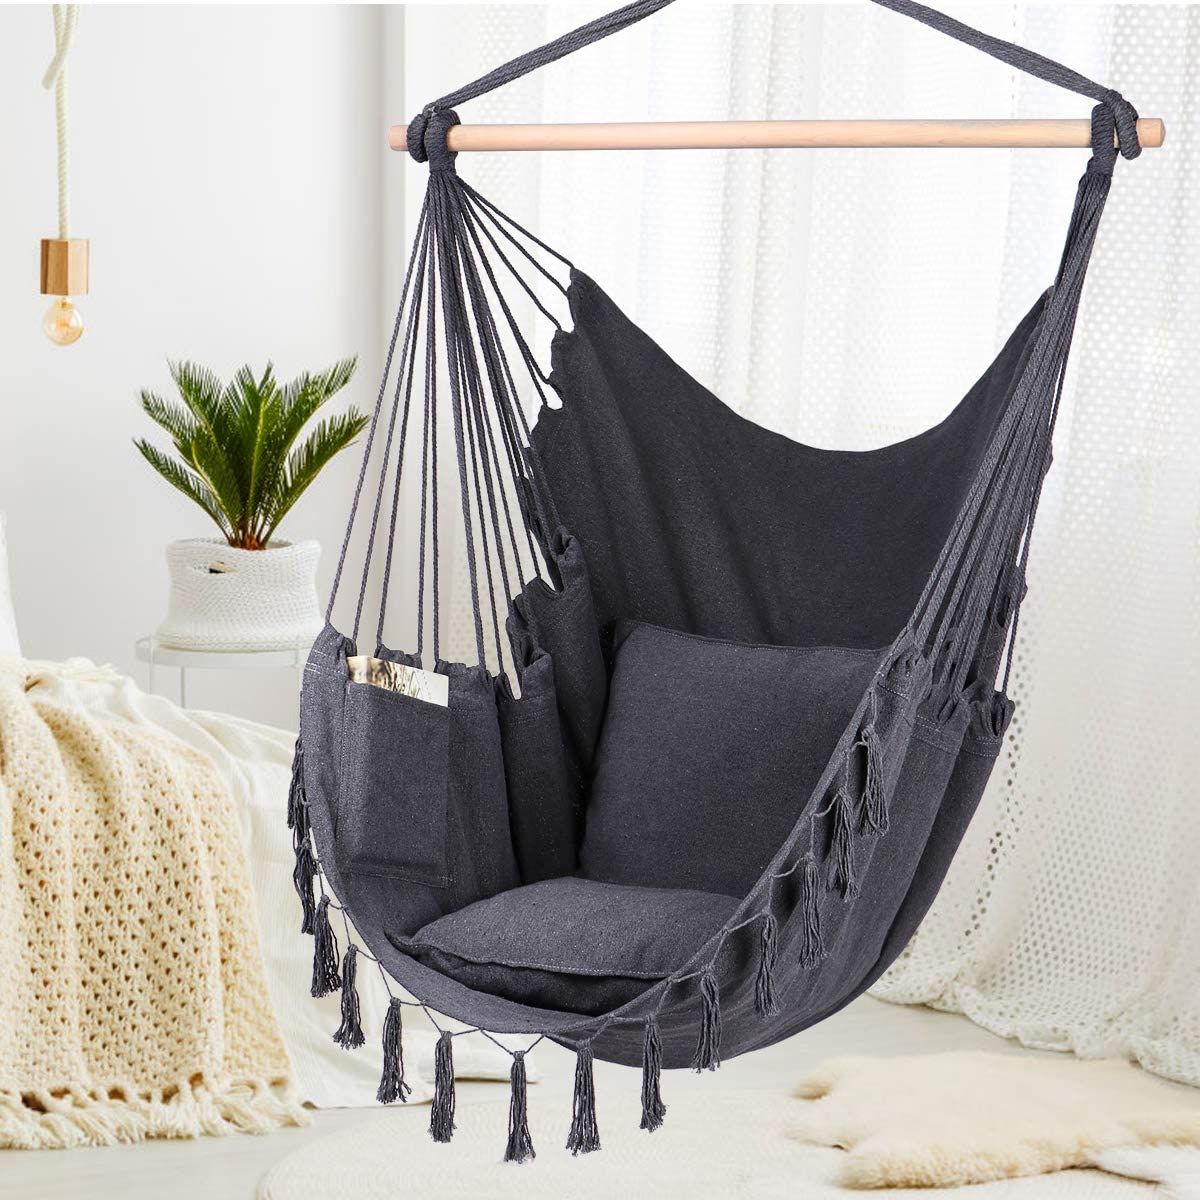 Max-330Lbs150KG-Hammock-Chair-Hanging-Rope-Swing-with-2-Cushions-Included-Large-Tassel-Hanging-Chair-1726402-1